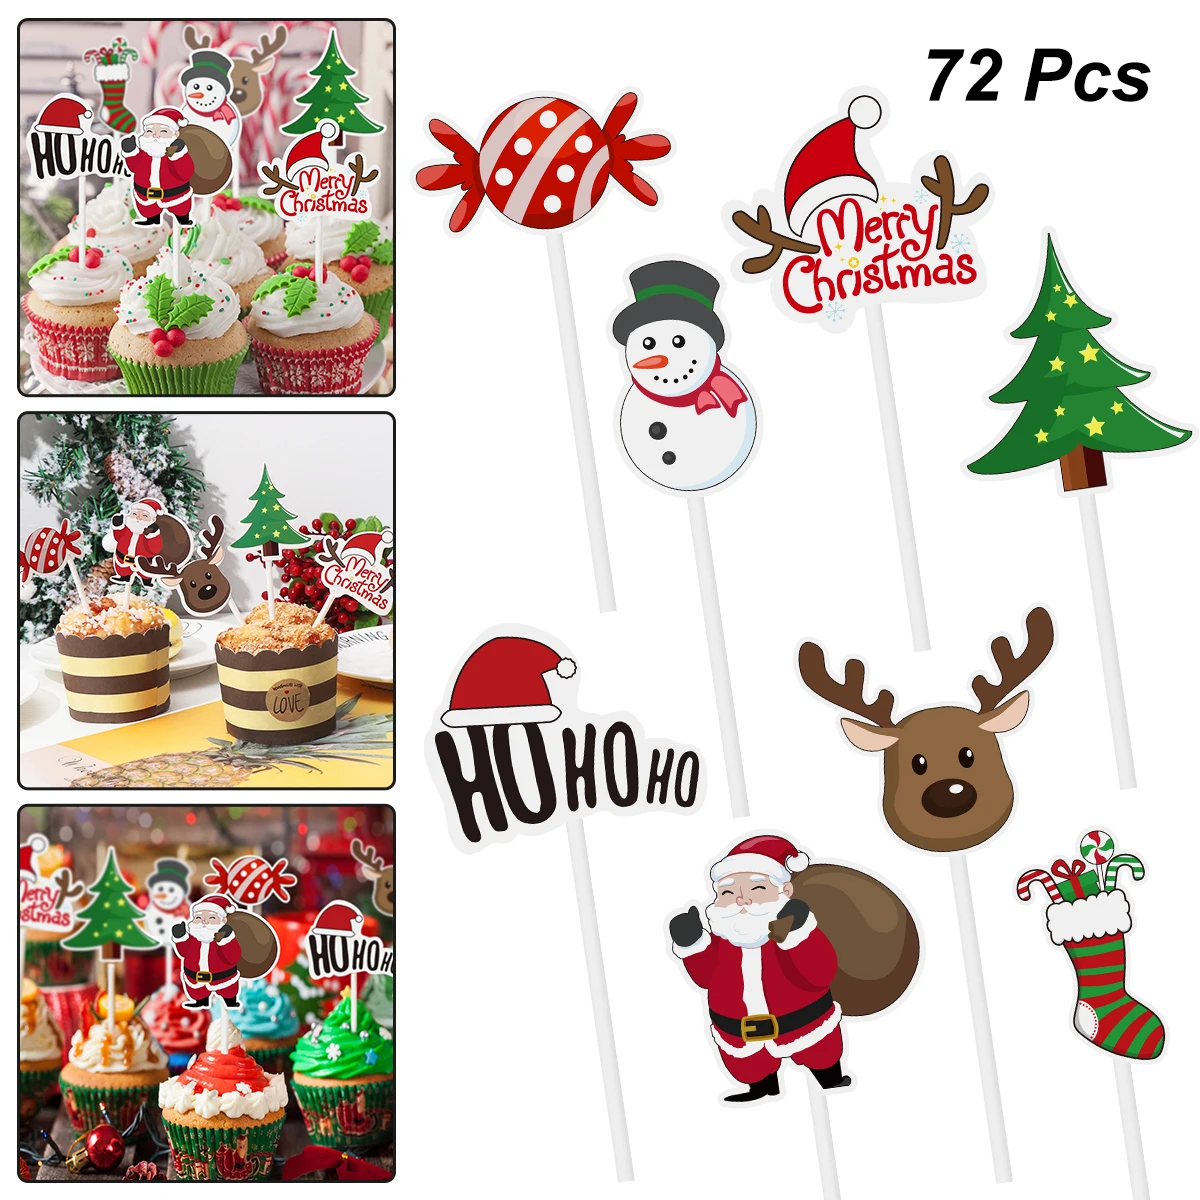 

Amosfun 72PCS Christmas Cupcake Toppers Santa Claus Tree Snowman Sock Candy Theme Party Cake Toppers Picks Decoration Supplies